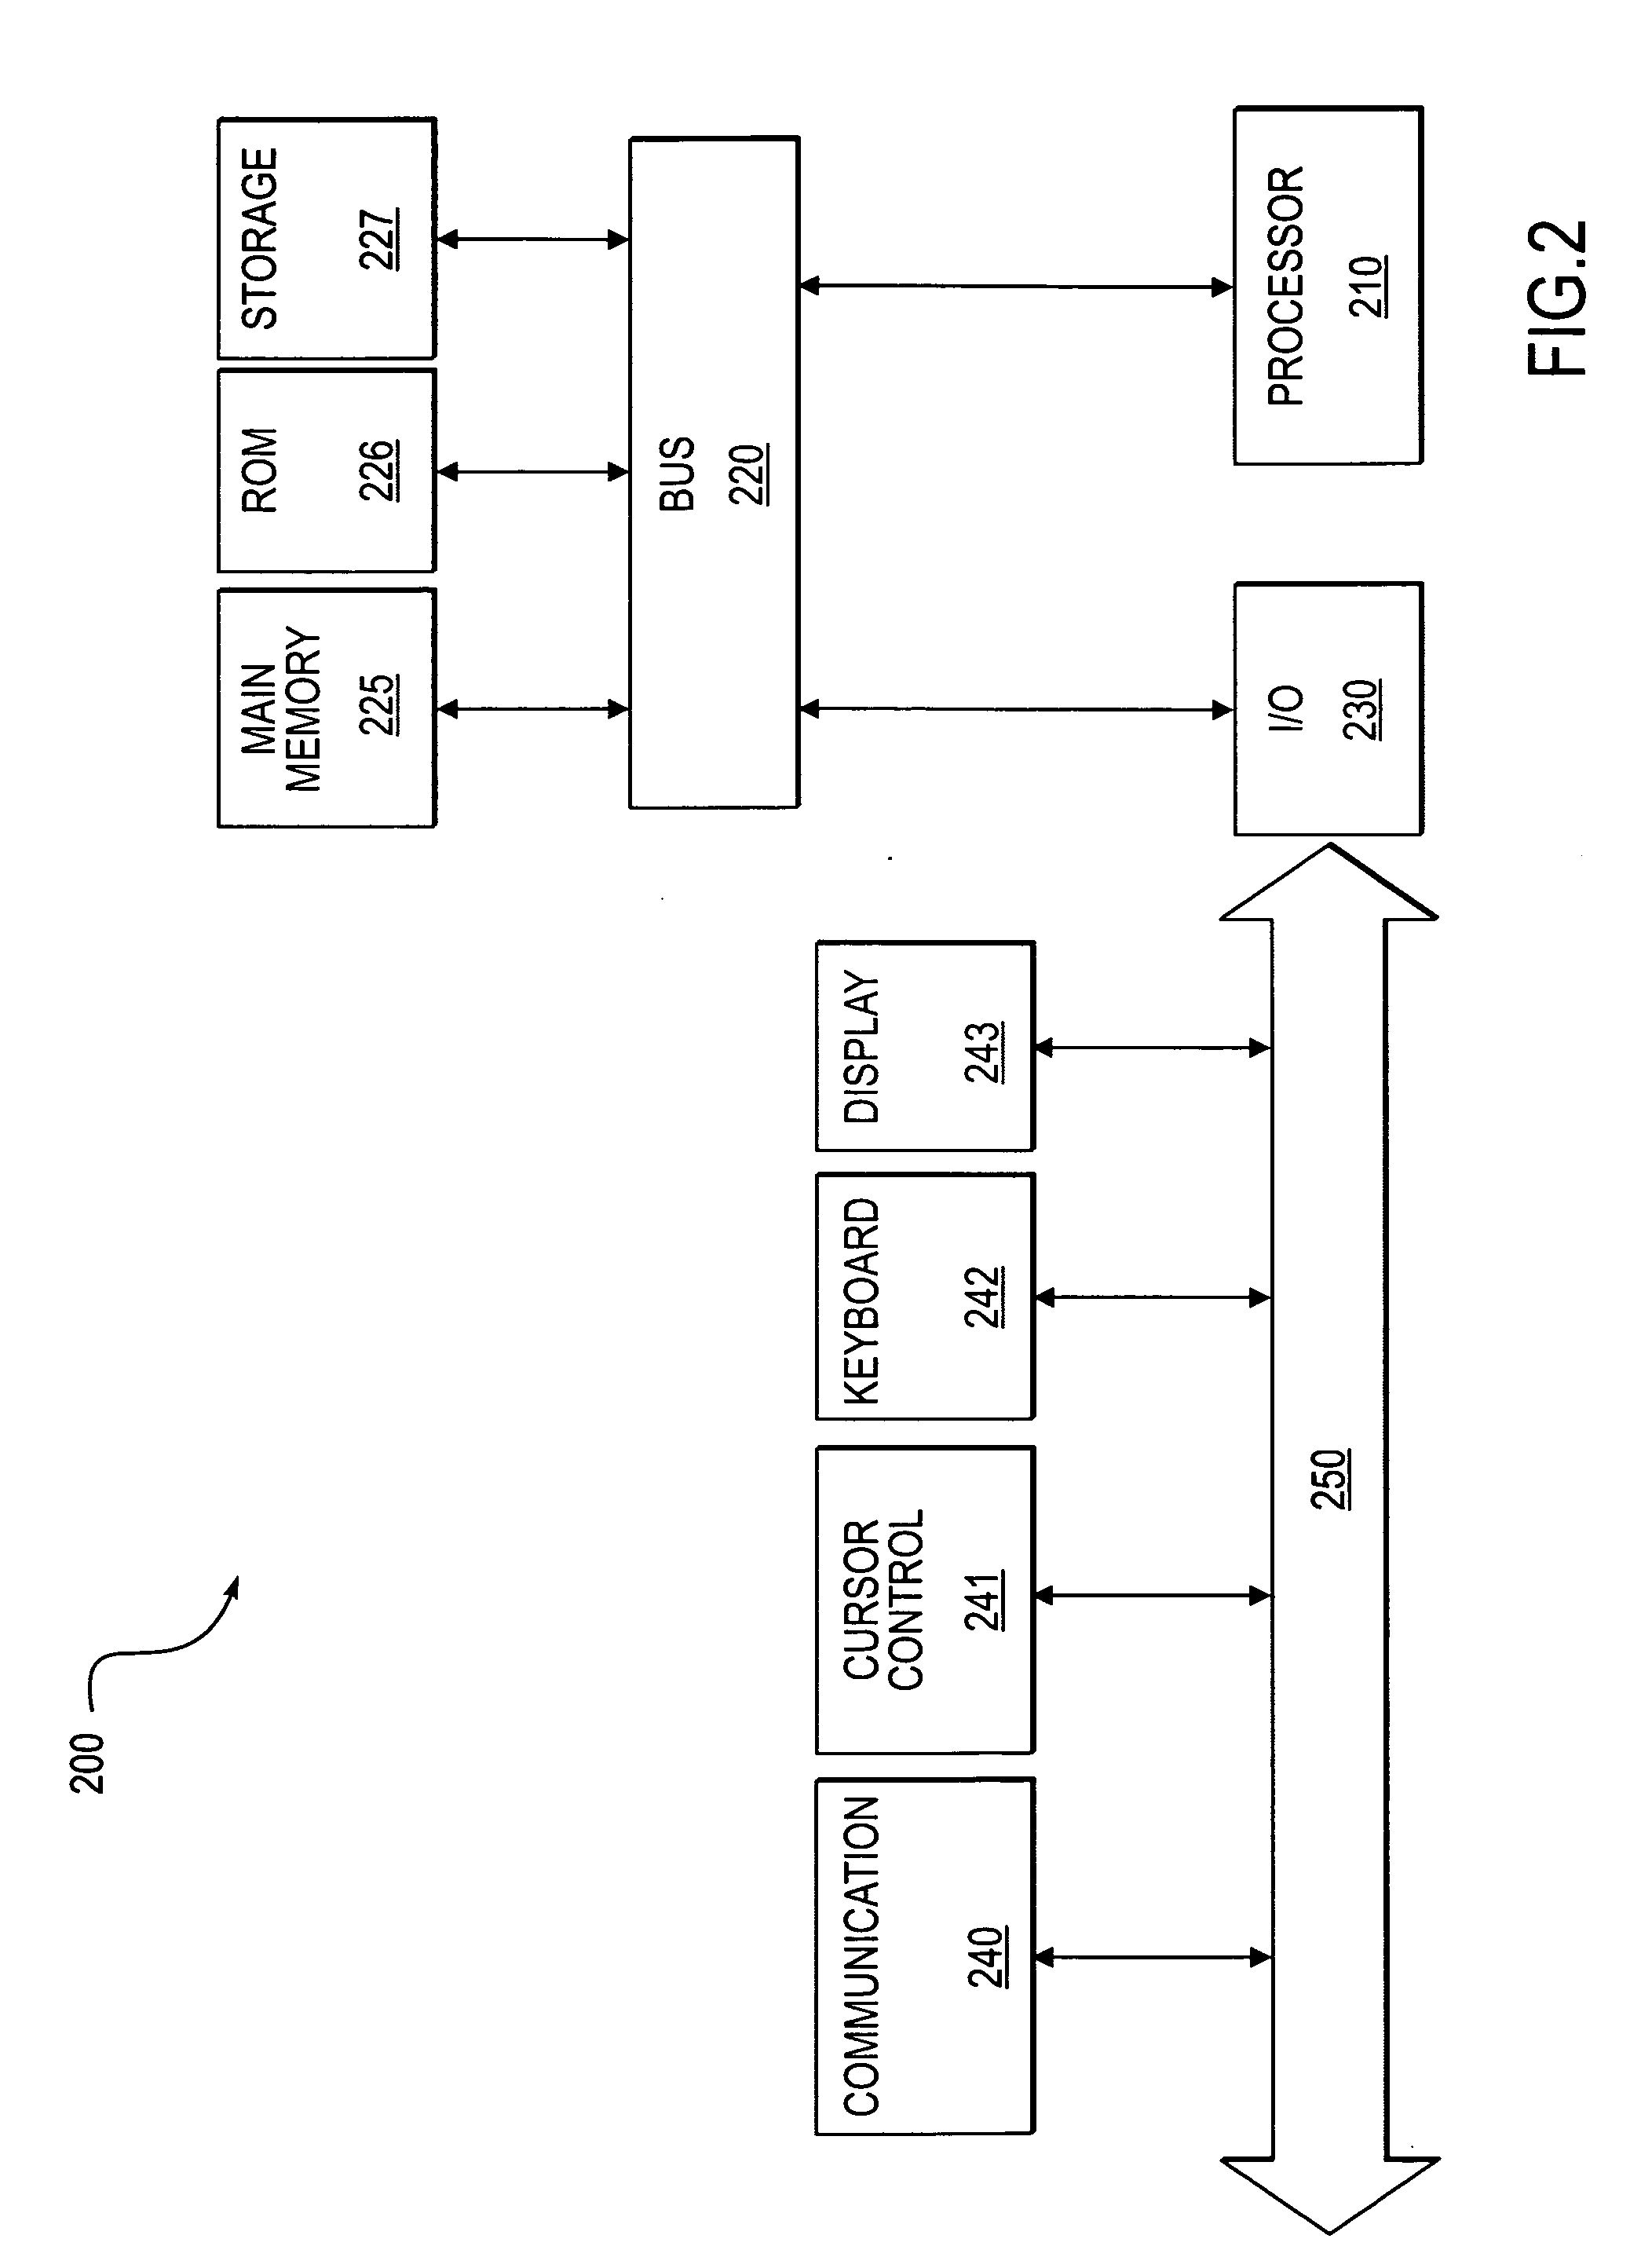 Method and system for system visualization